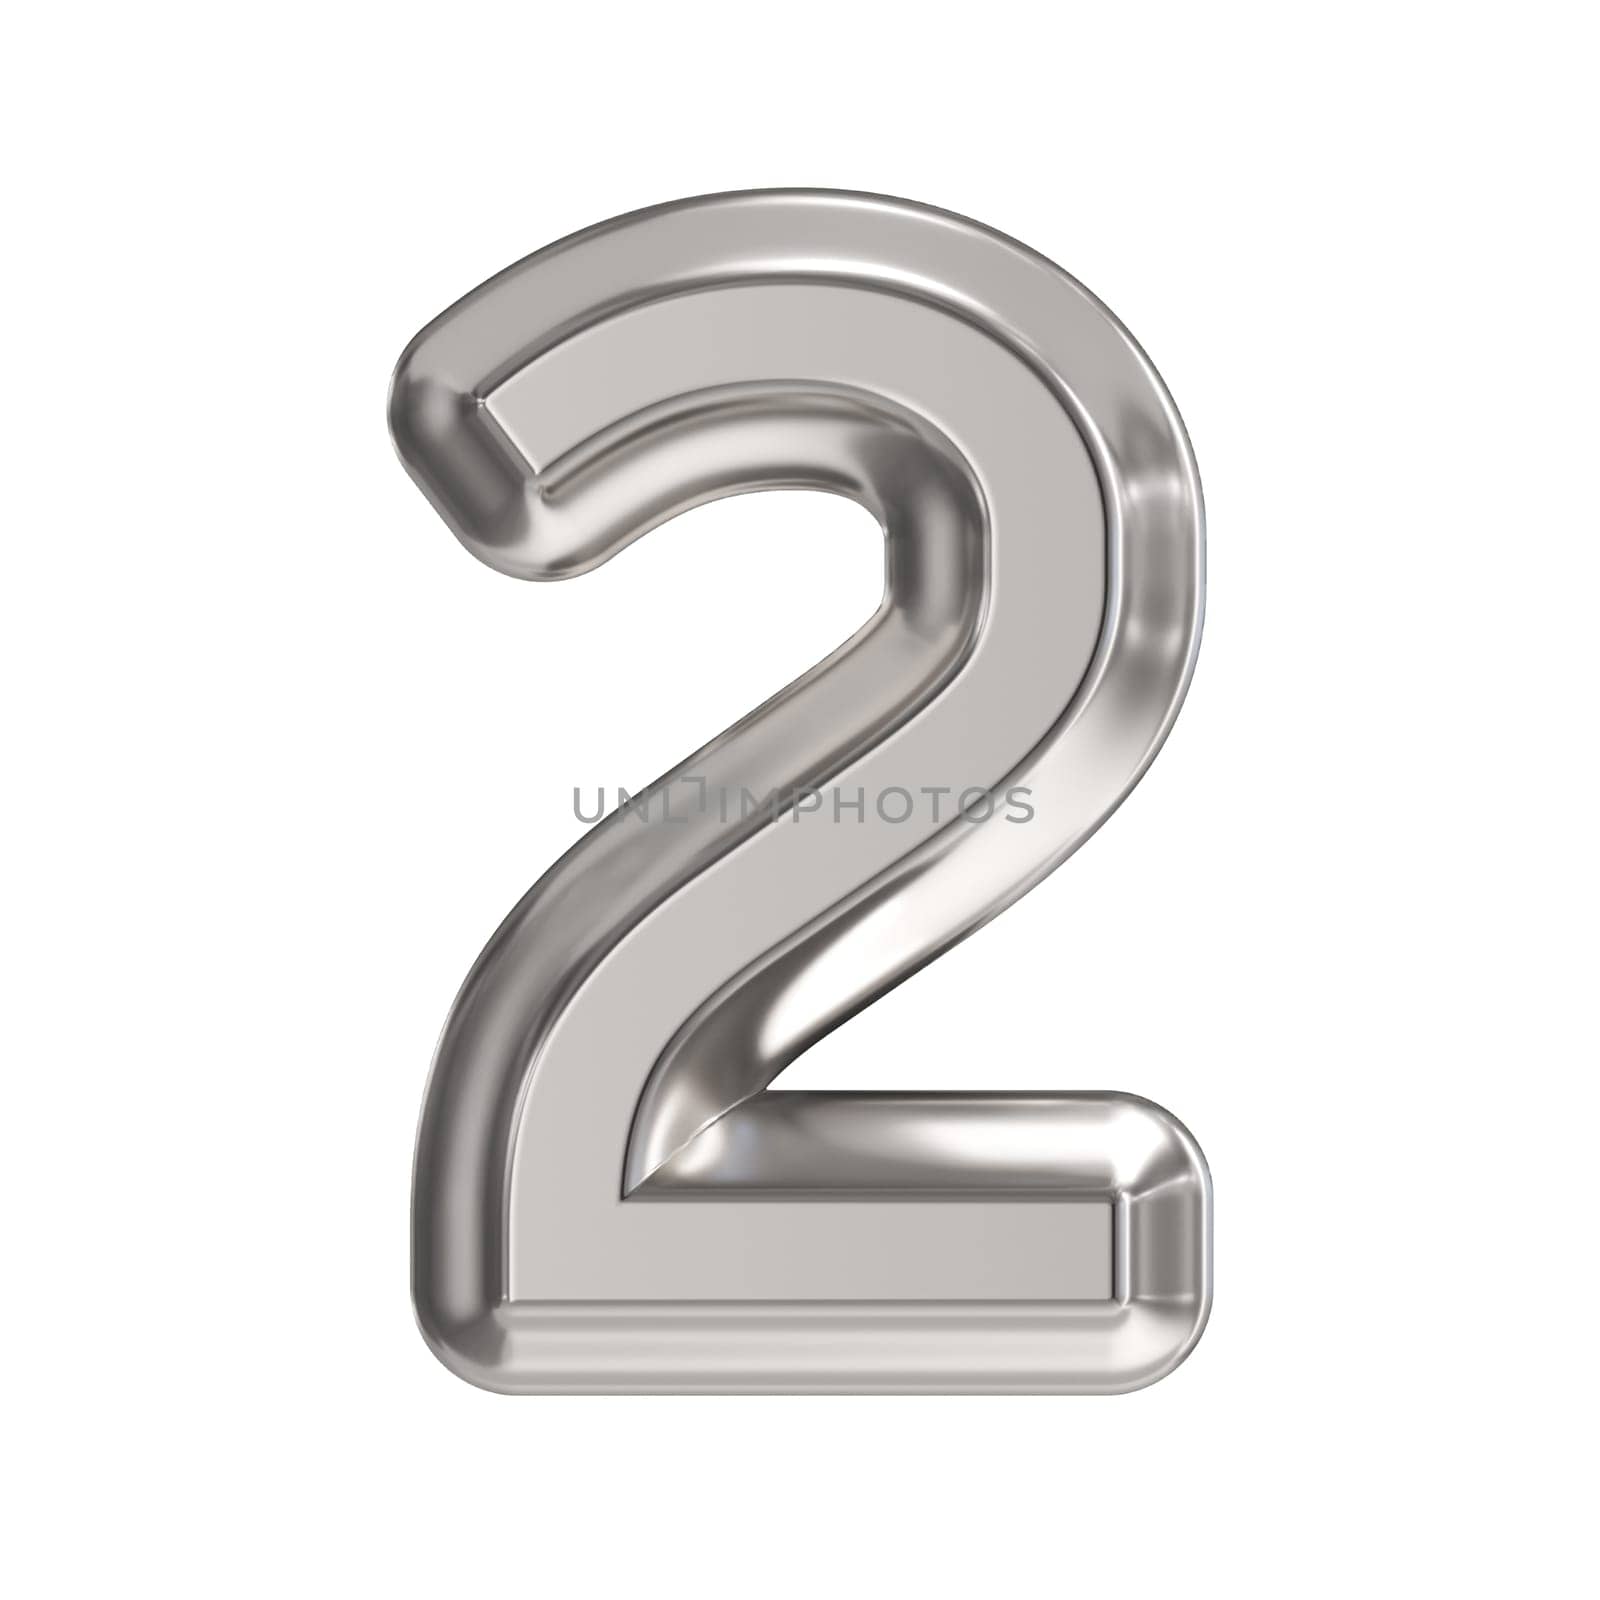 Steel font Number 2 TWO 3D rendering illustration isolated on white background